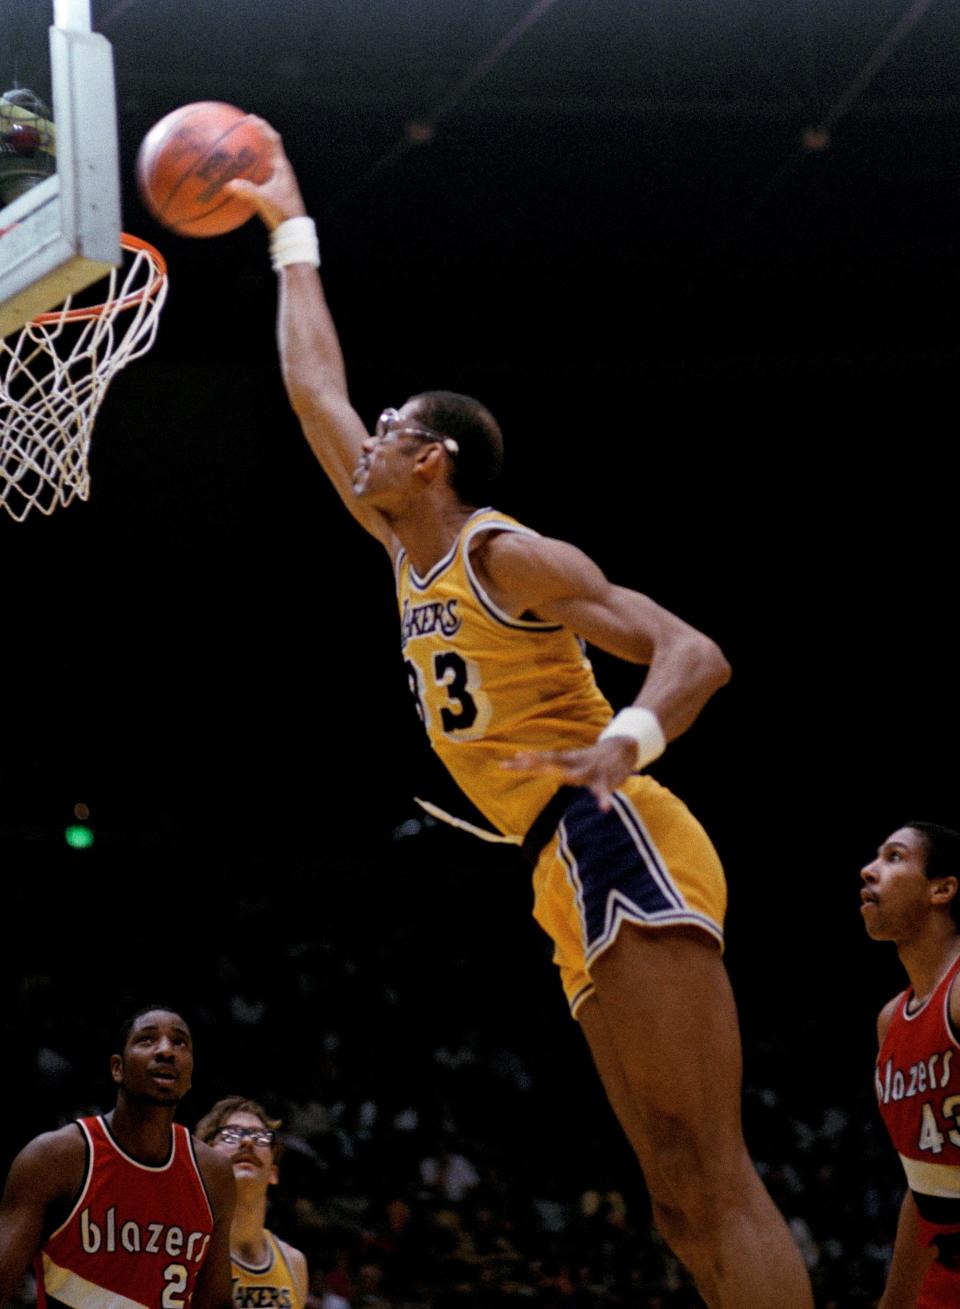 Los Angeles Lakers Kareem Abdul-Jabbar (33) approaches the basket in the second game of the NBA basketball playoffs against the Portland Trailblazers in Los Angeles in April 26, 1983.